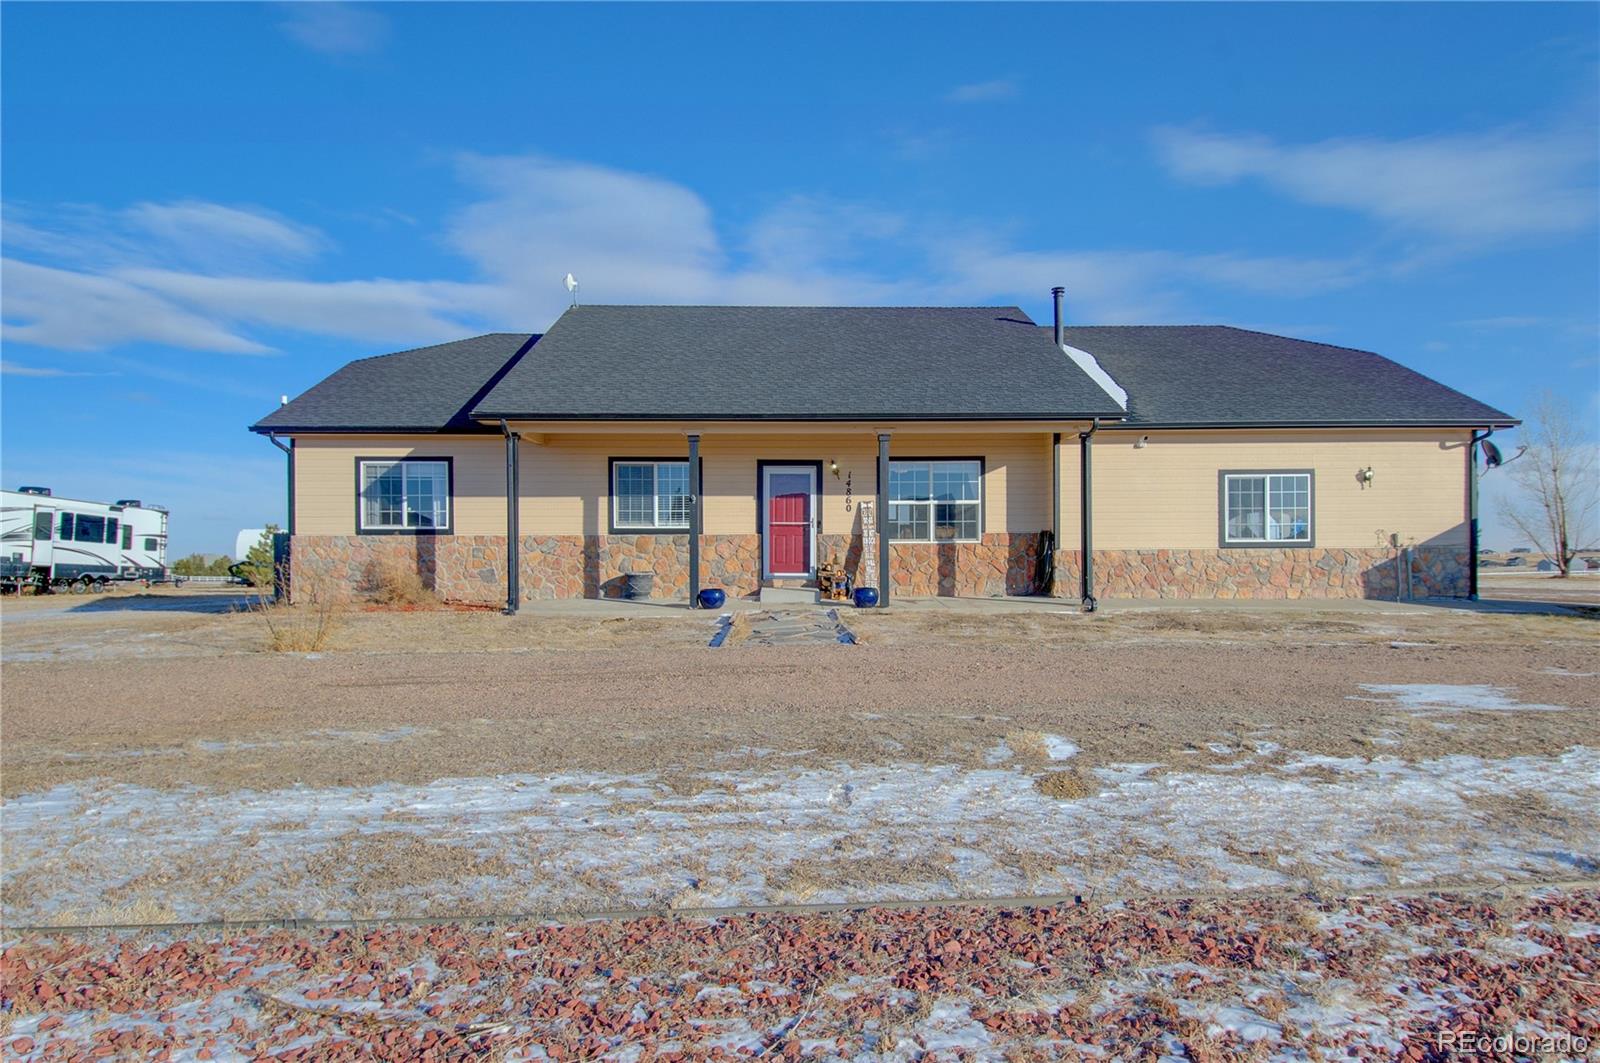 Report Image for 14860  Avery Way,Keenesburg, Colorado